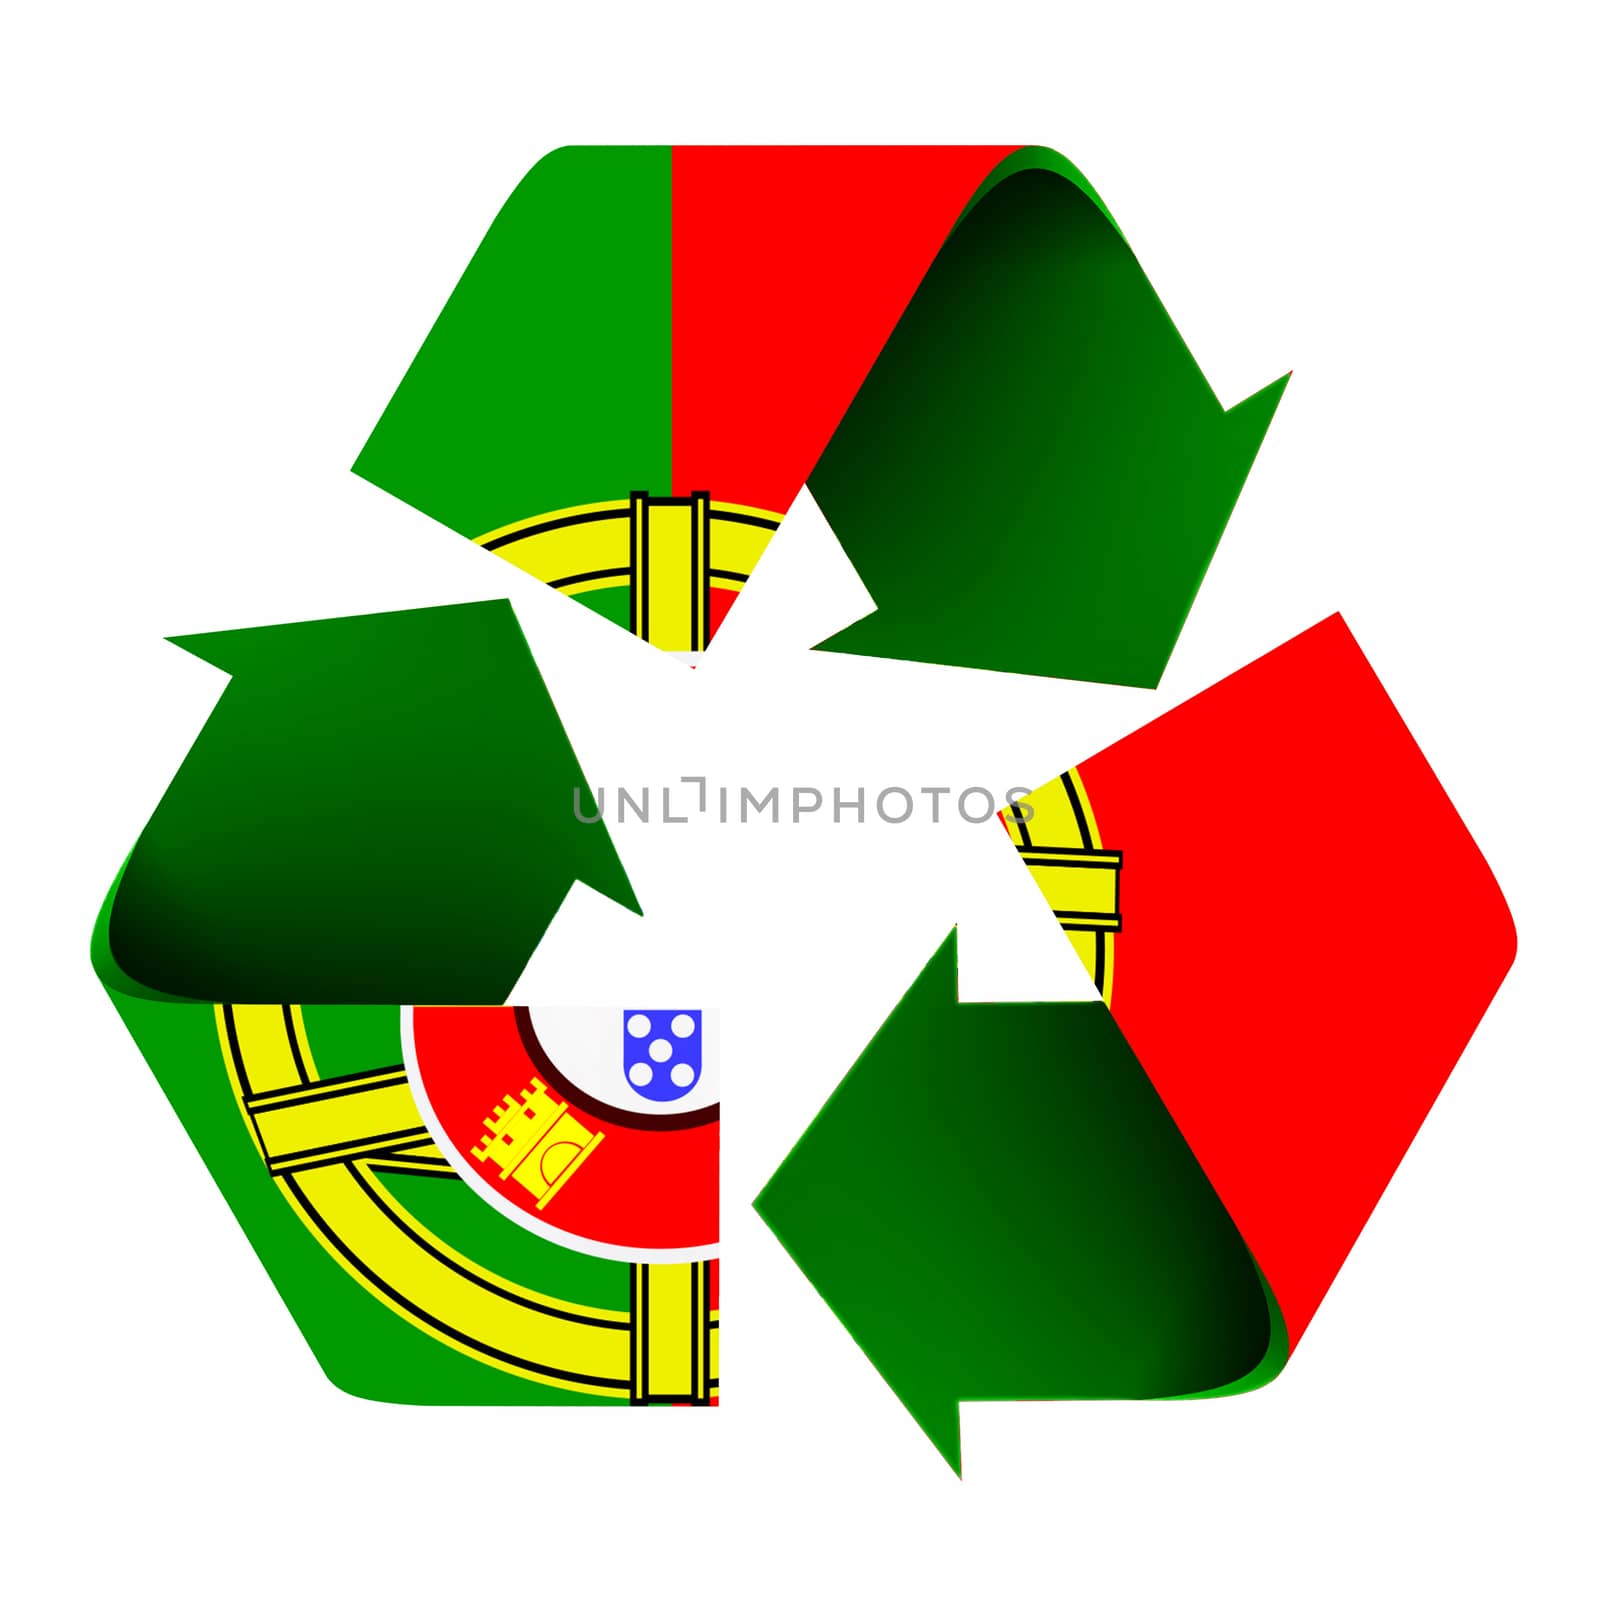 Portuguese Flag on a Recycle Symbol by rcarner